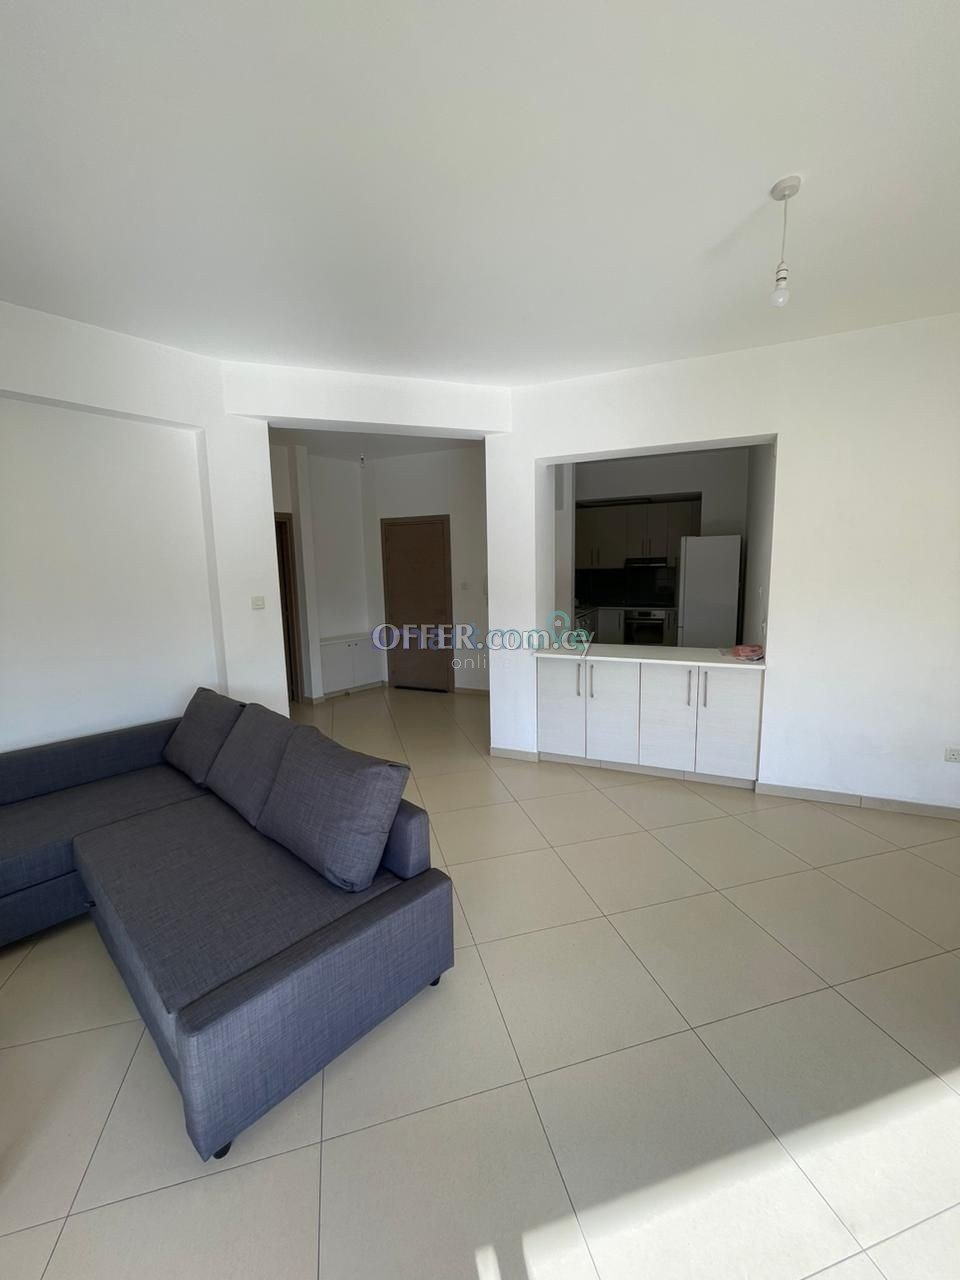 2 + 1 Bedroom Apartment For Rent Limassol - 10